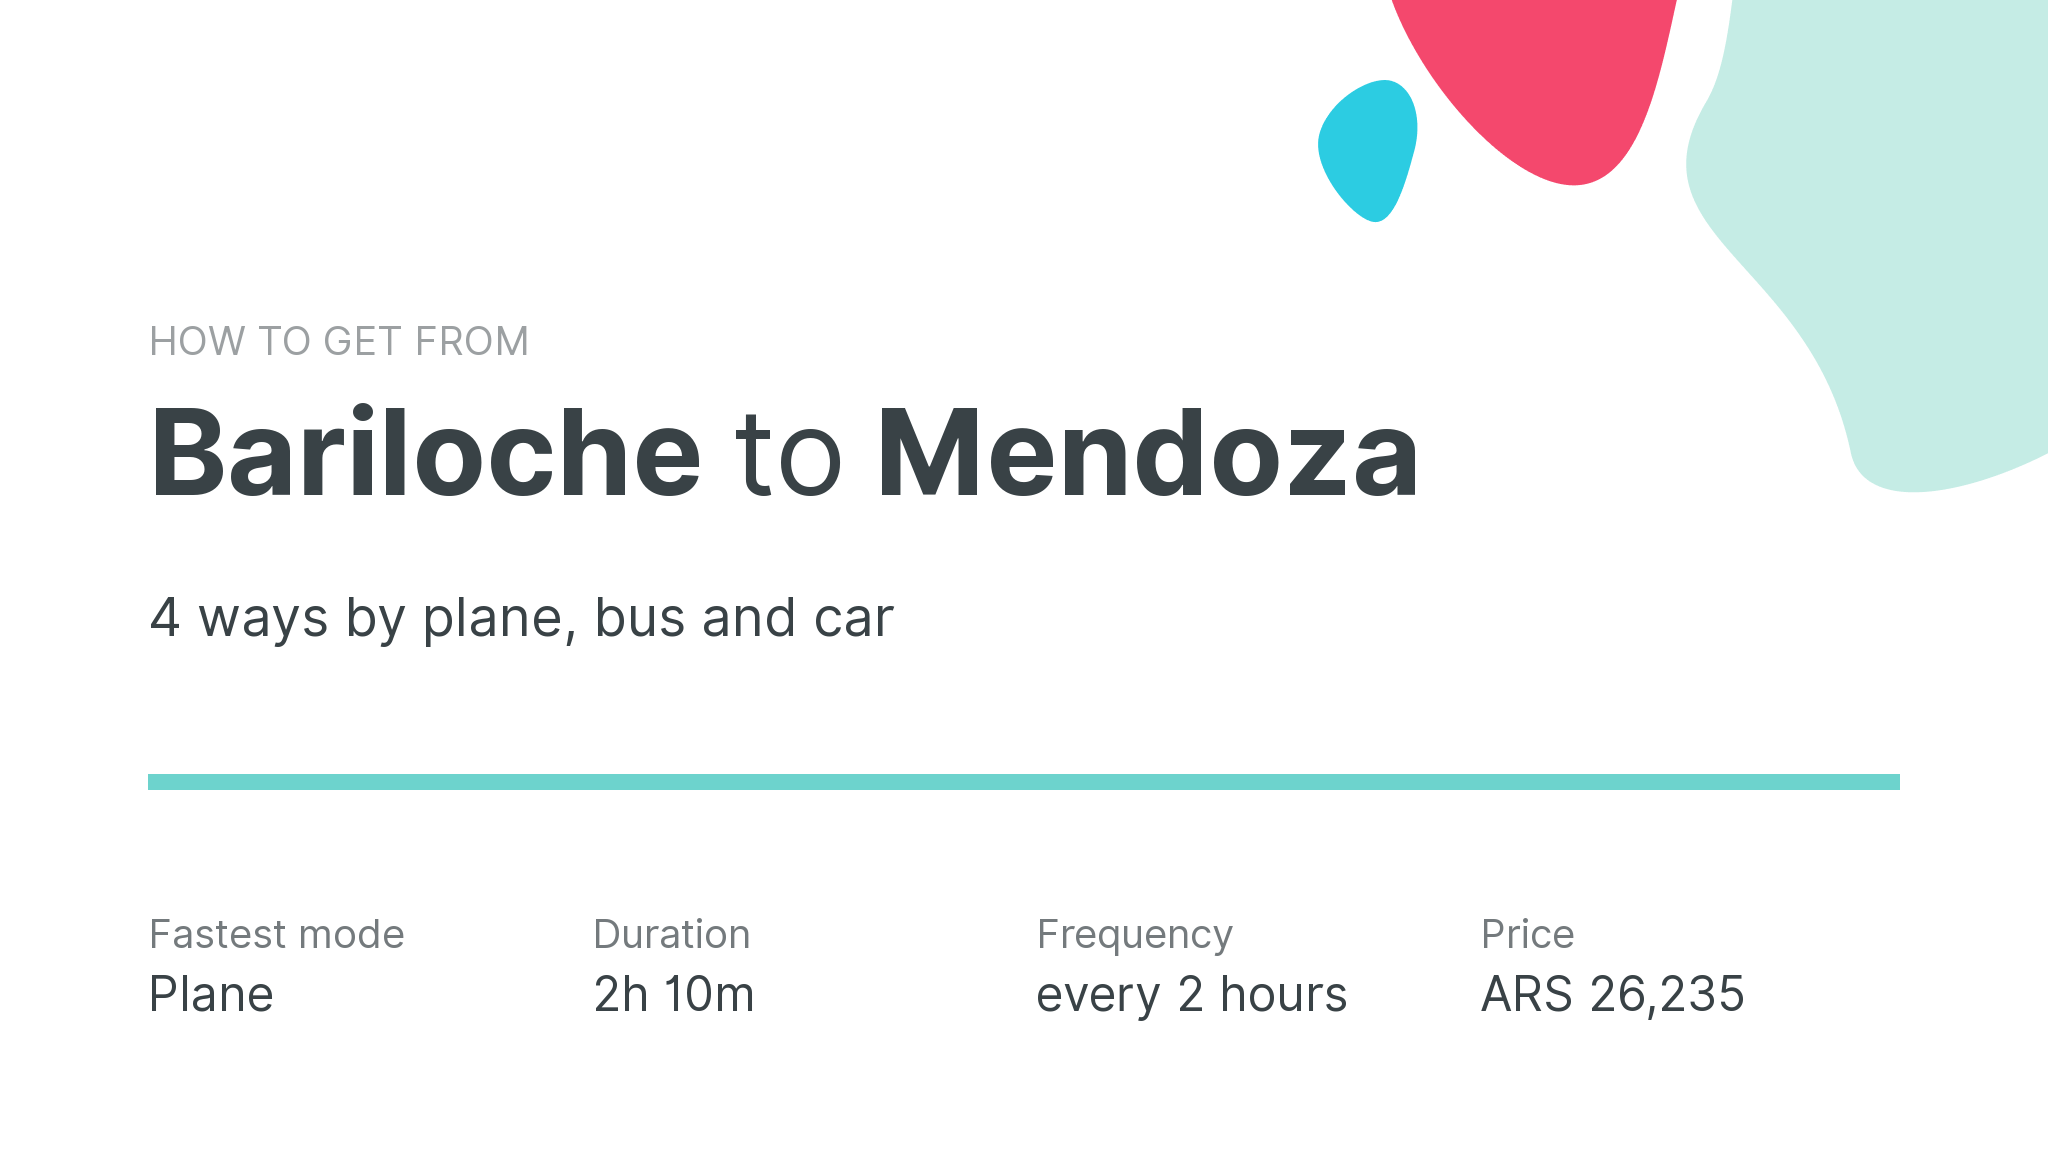 How do I get from Bariloche to Mendoza